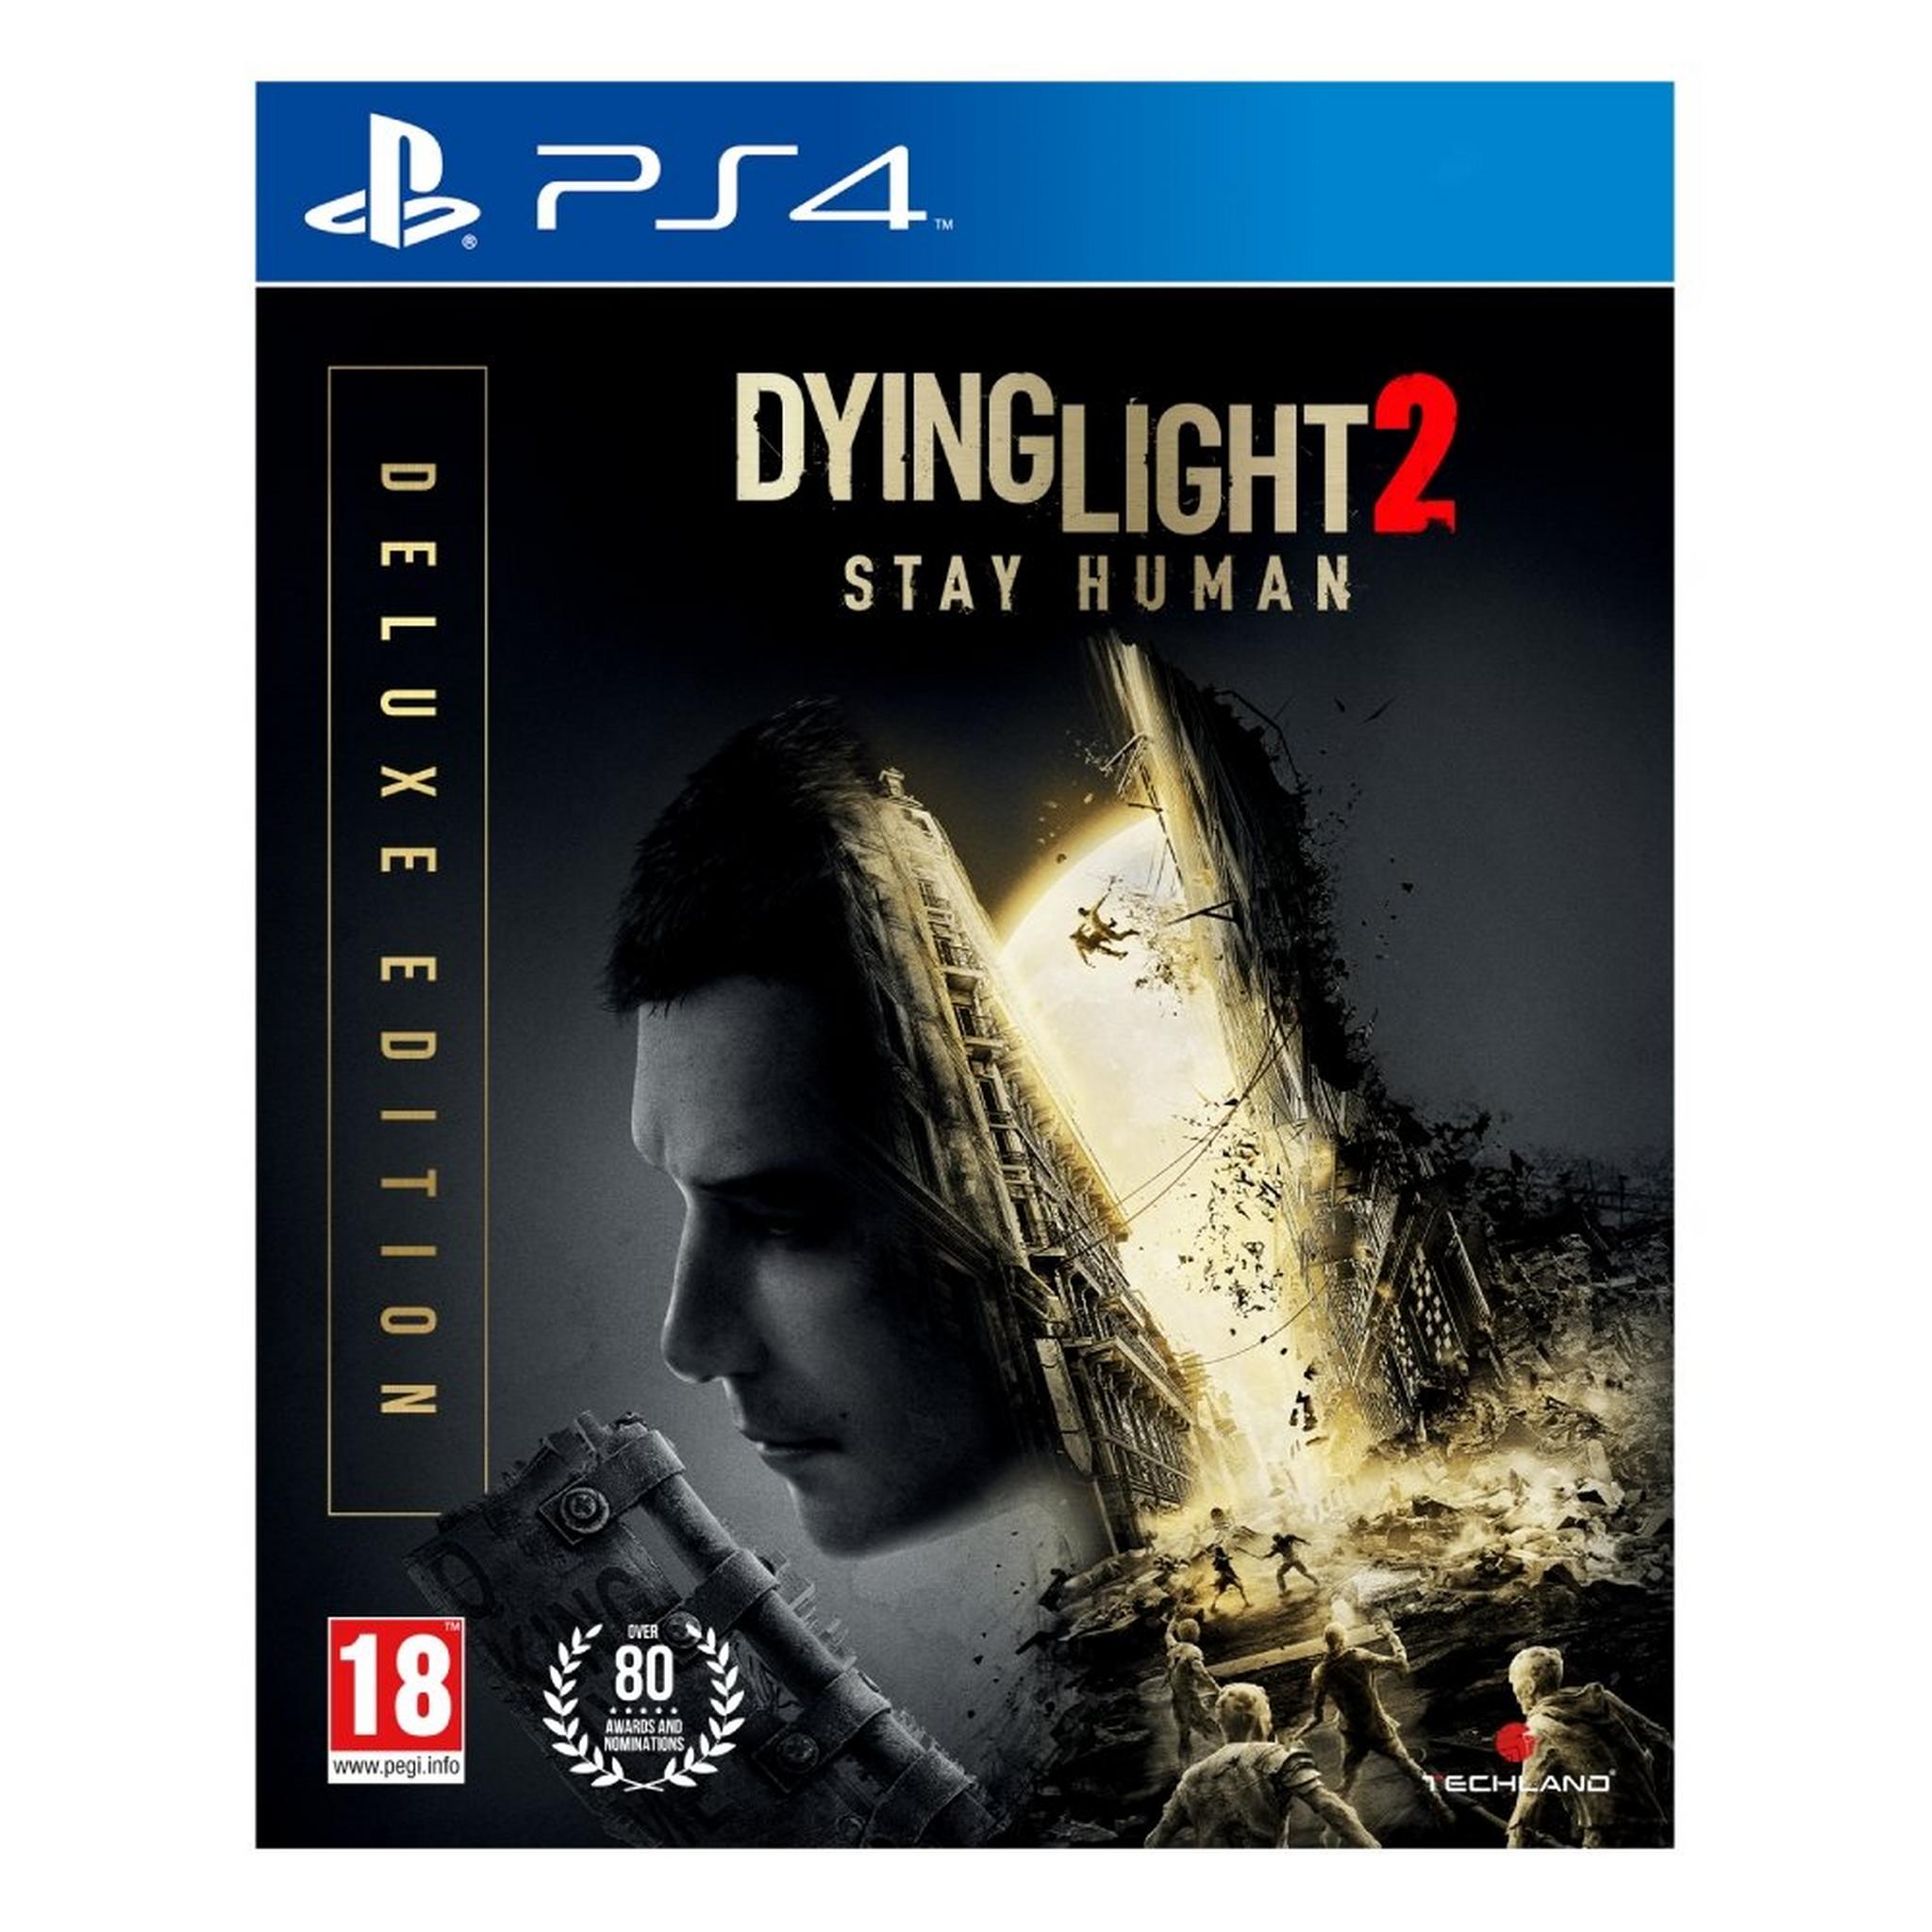 Dying Light 2 Stay Human - Deluxe Edition - PS4 Game